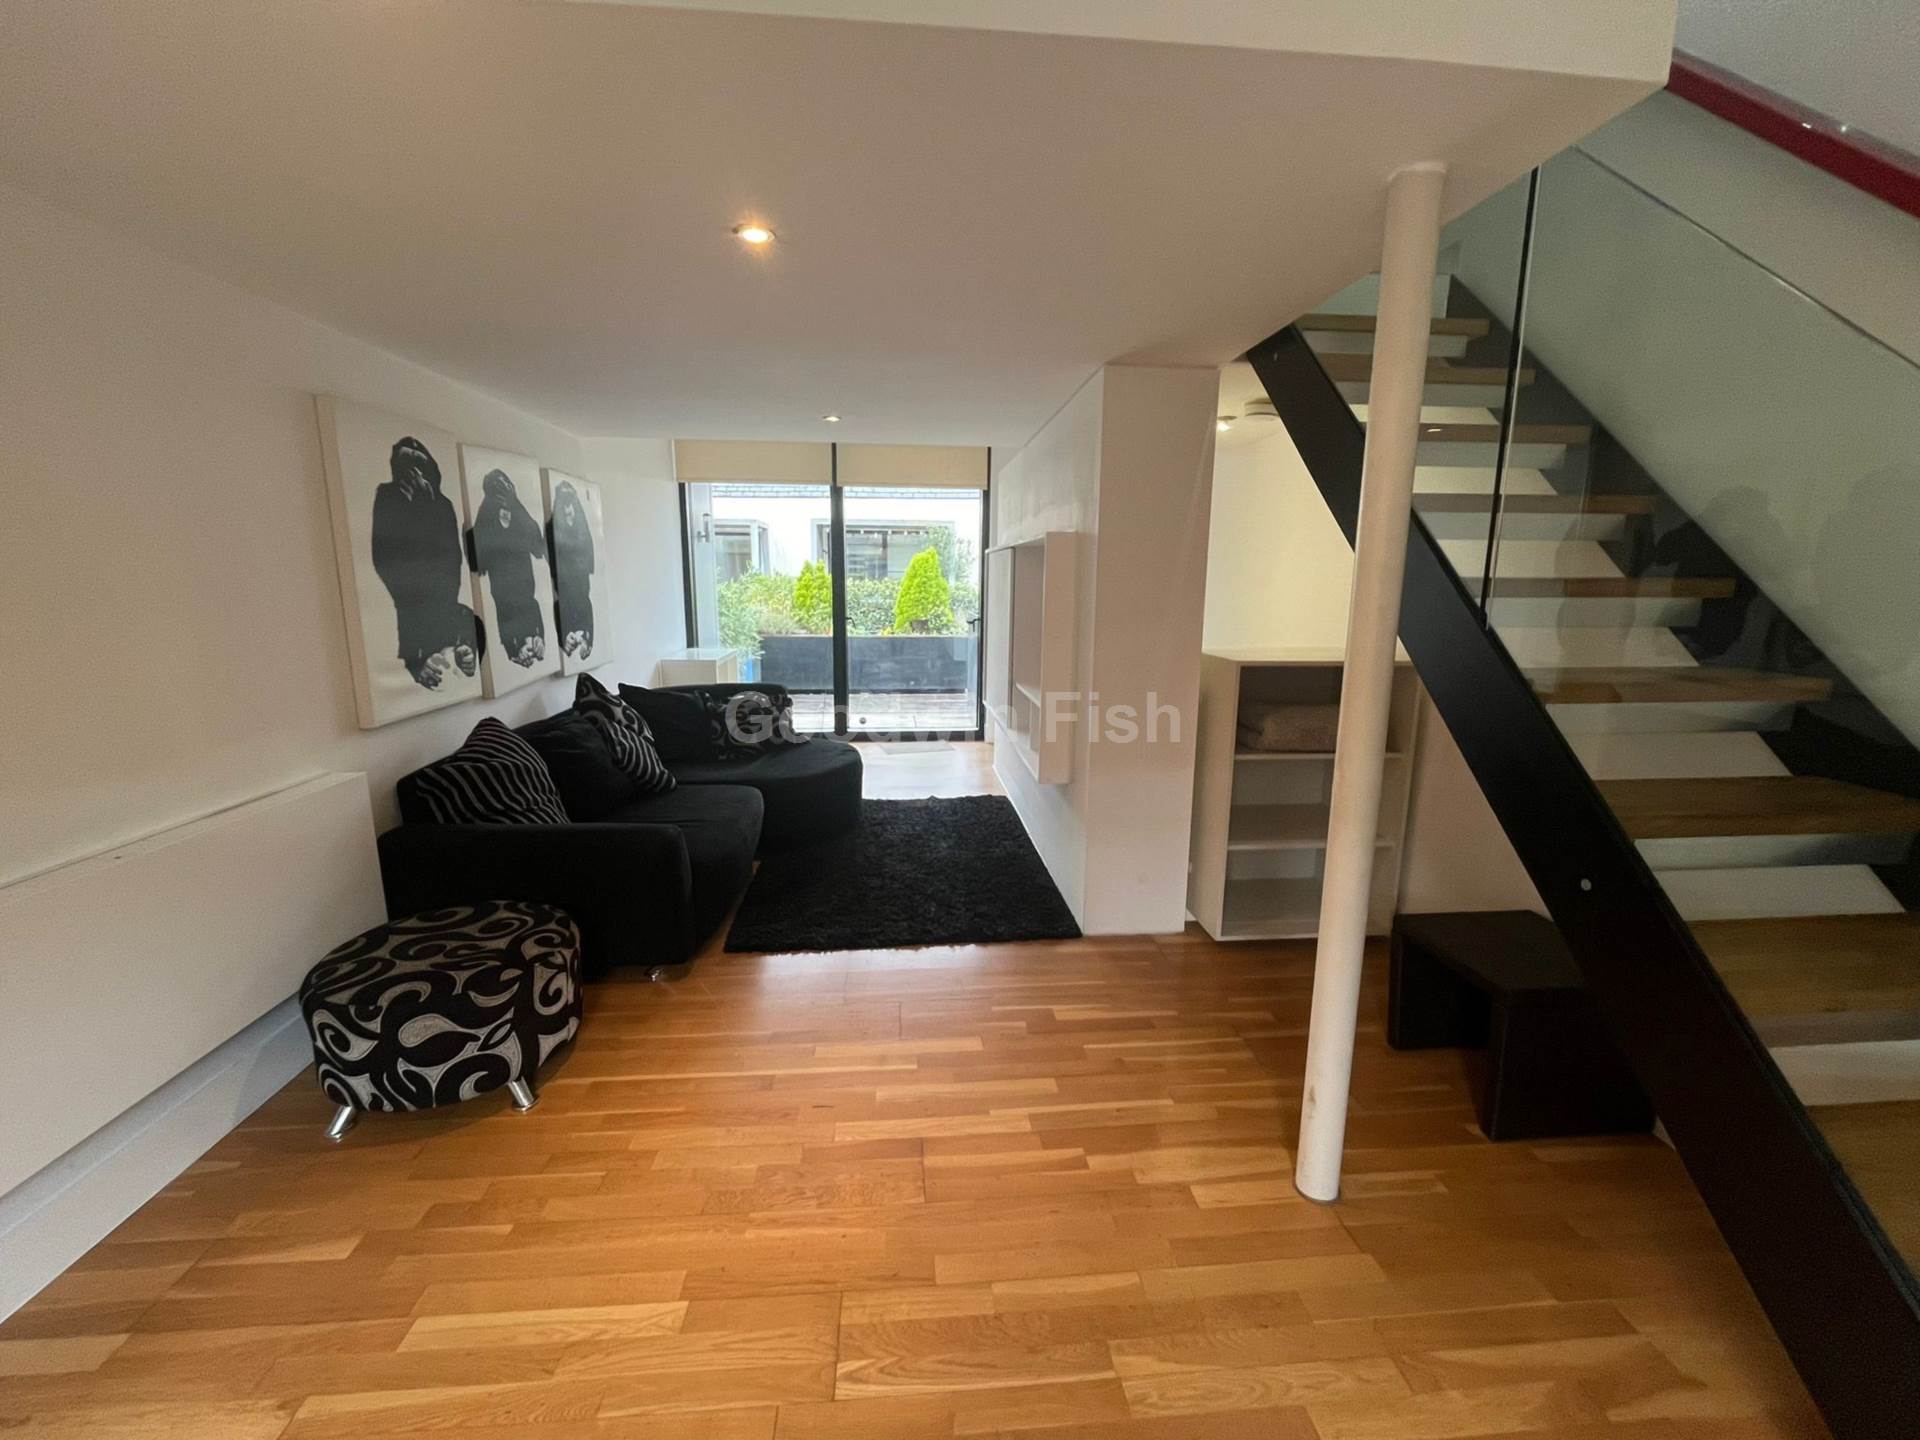 2 bed Town House for rent in Salford. From Goodwin Fish & Co - Manchester